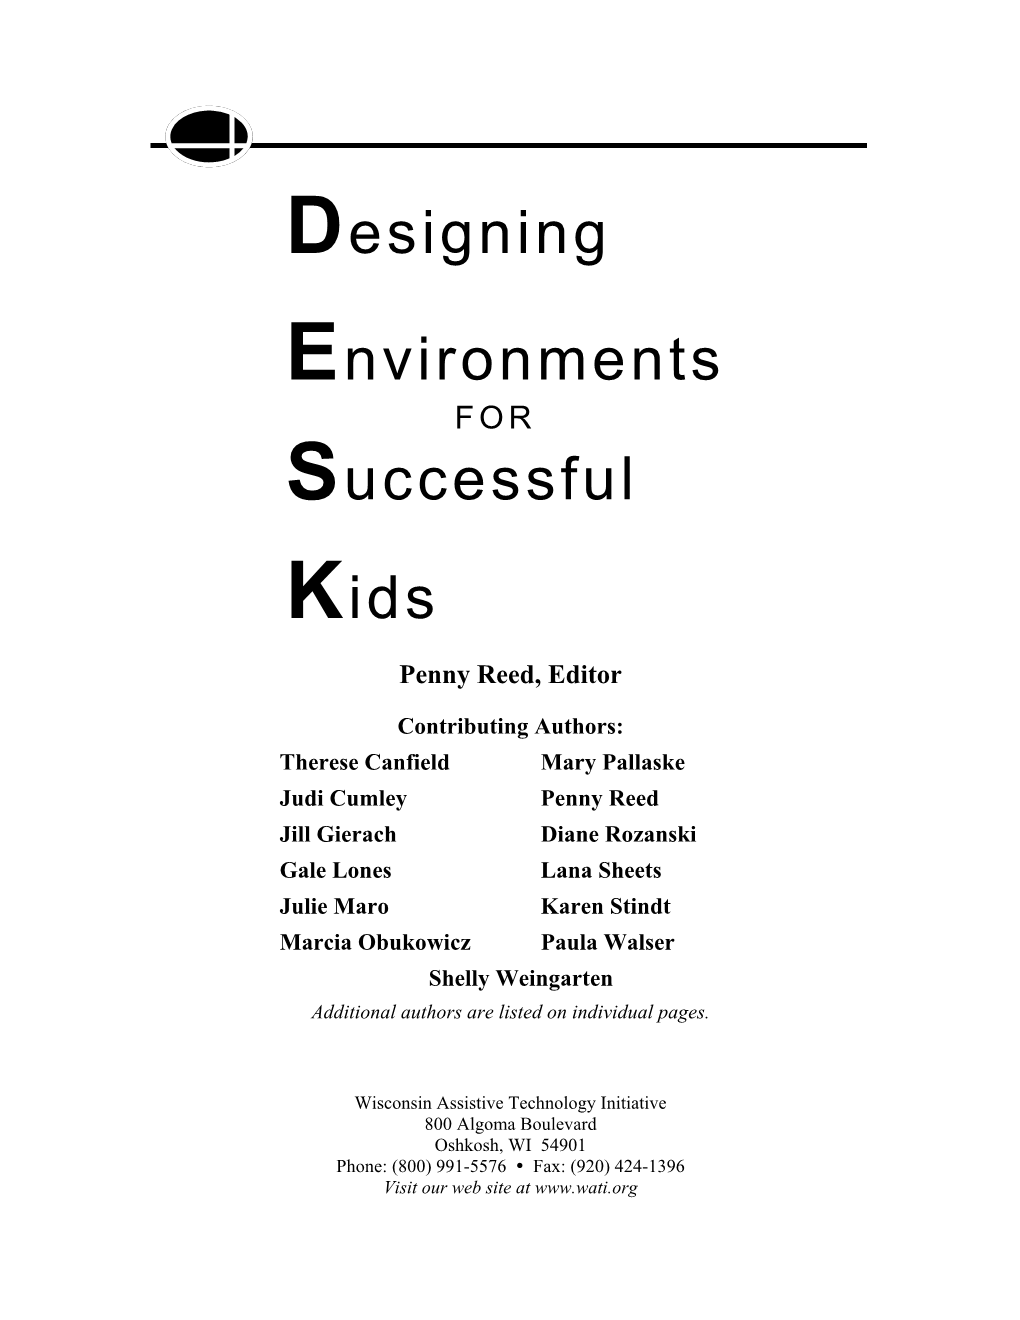 Designing Environments for Successful Kids in the Home and Other Birth to Three Environments